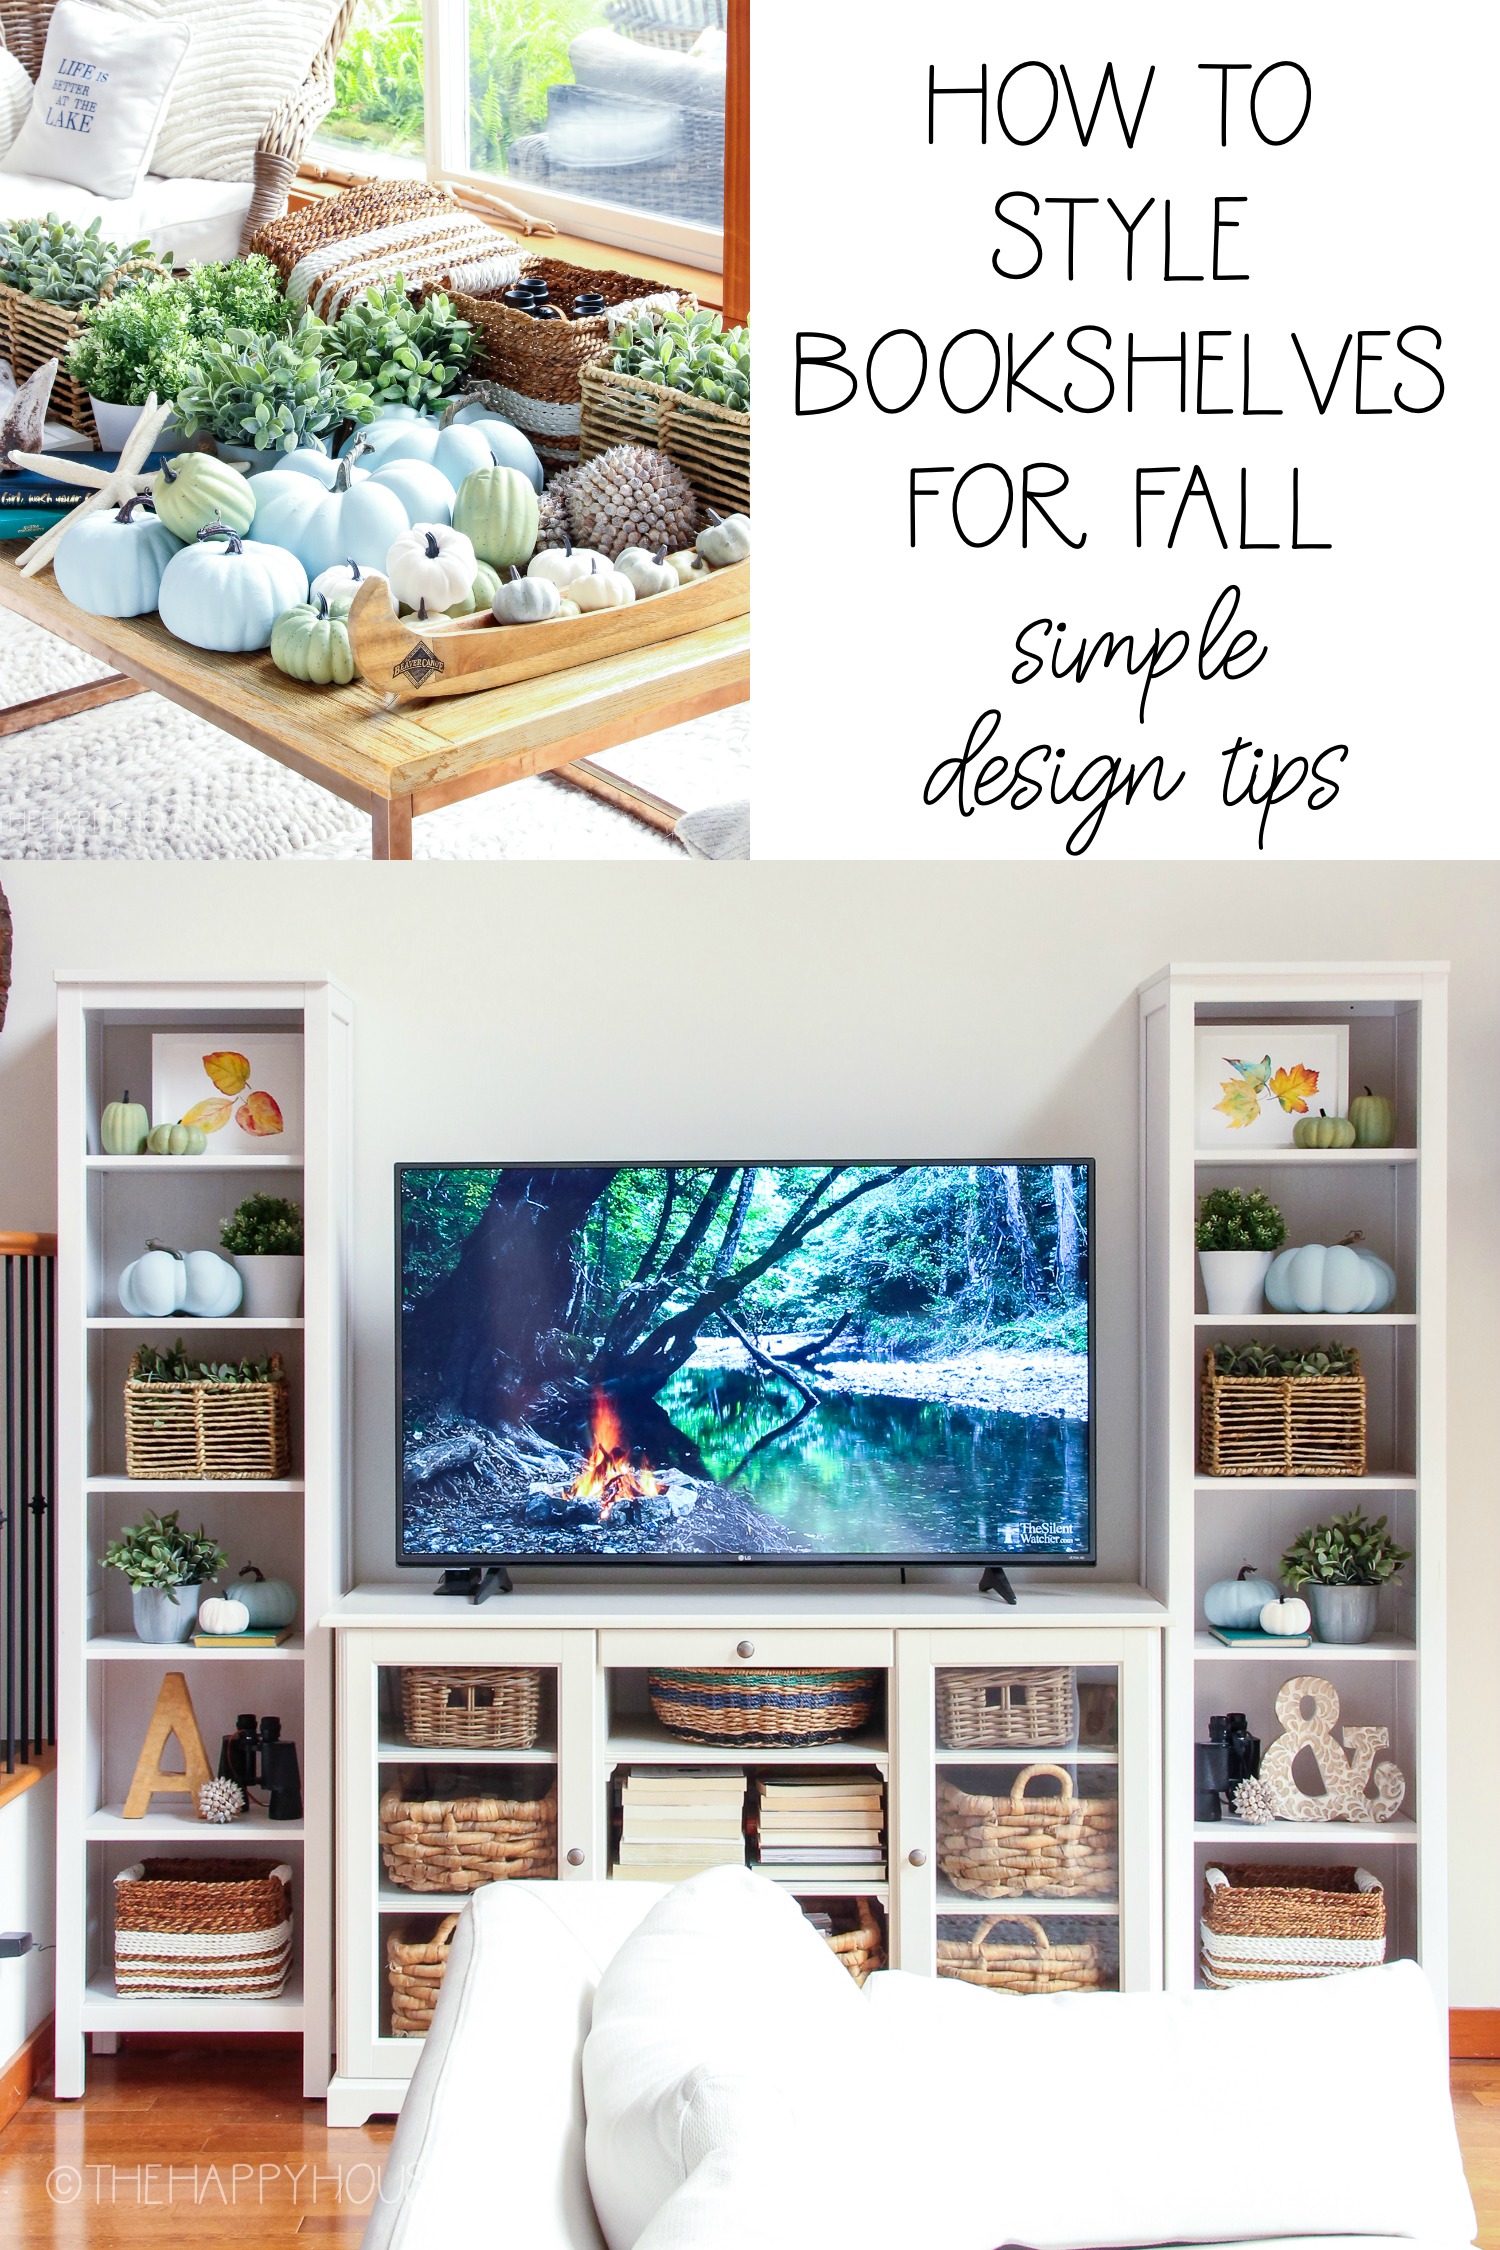 How To Style Bookshelves For Fall Simple Design Tips graphic.